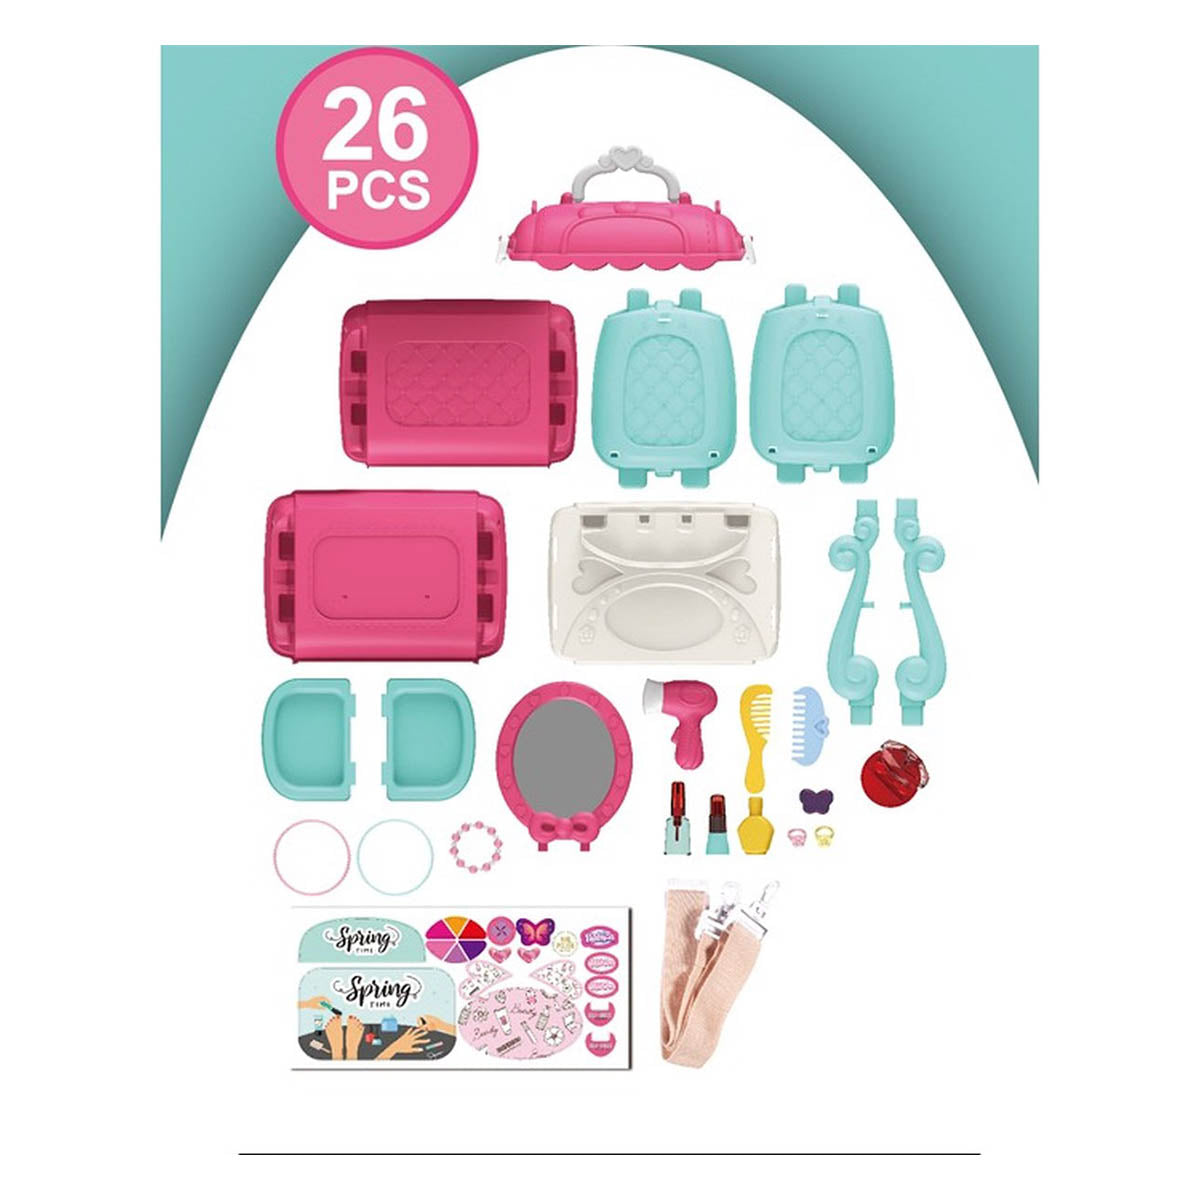 <tc>Ariko</tc> Toy suitcase Beauty salon 31 pieces - Hair dryer, mirror, make-up, perfume and much more - handy take-along suitcase